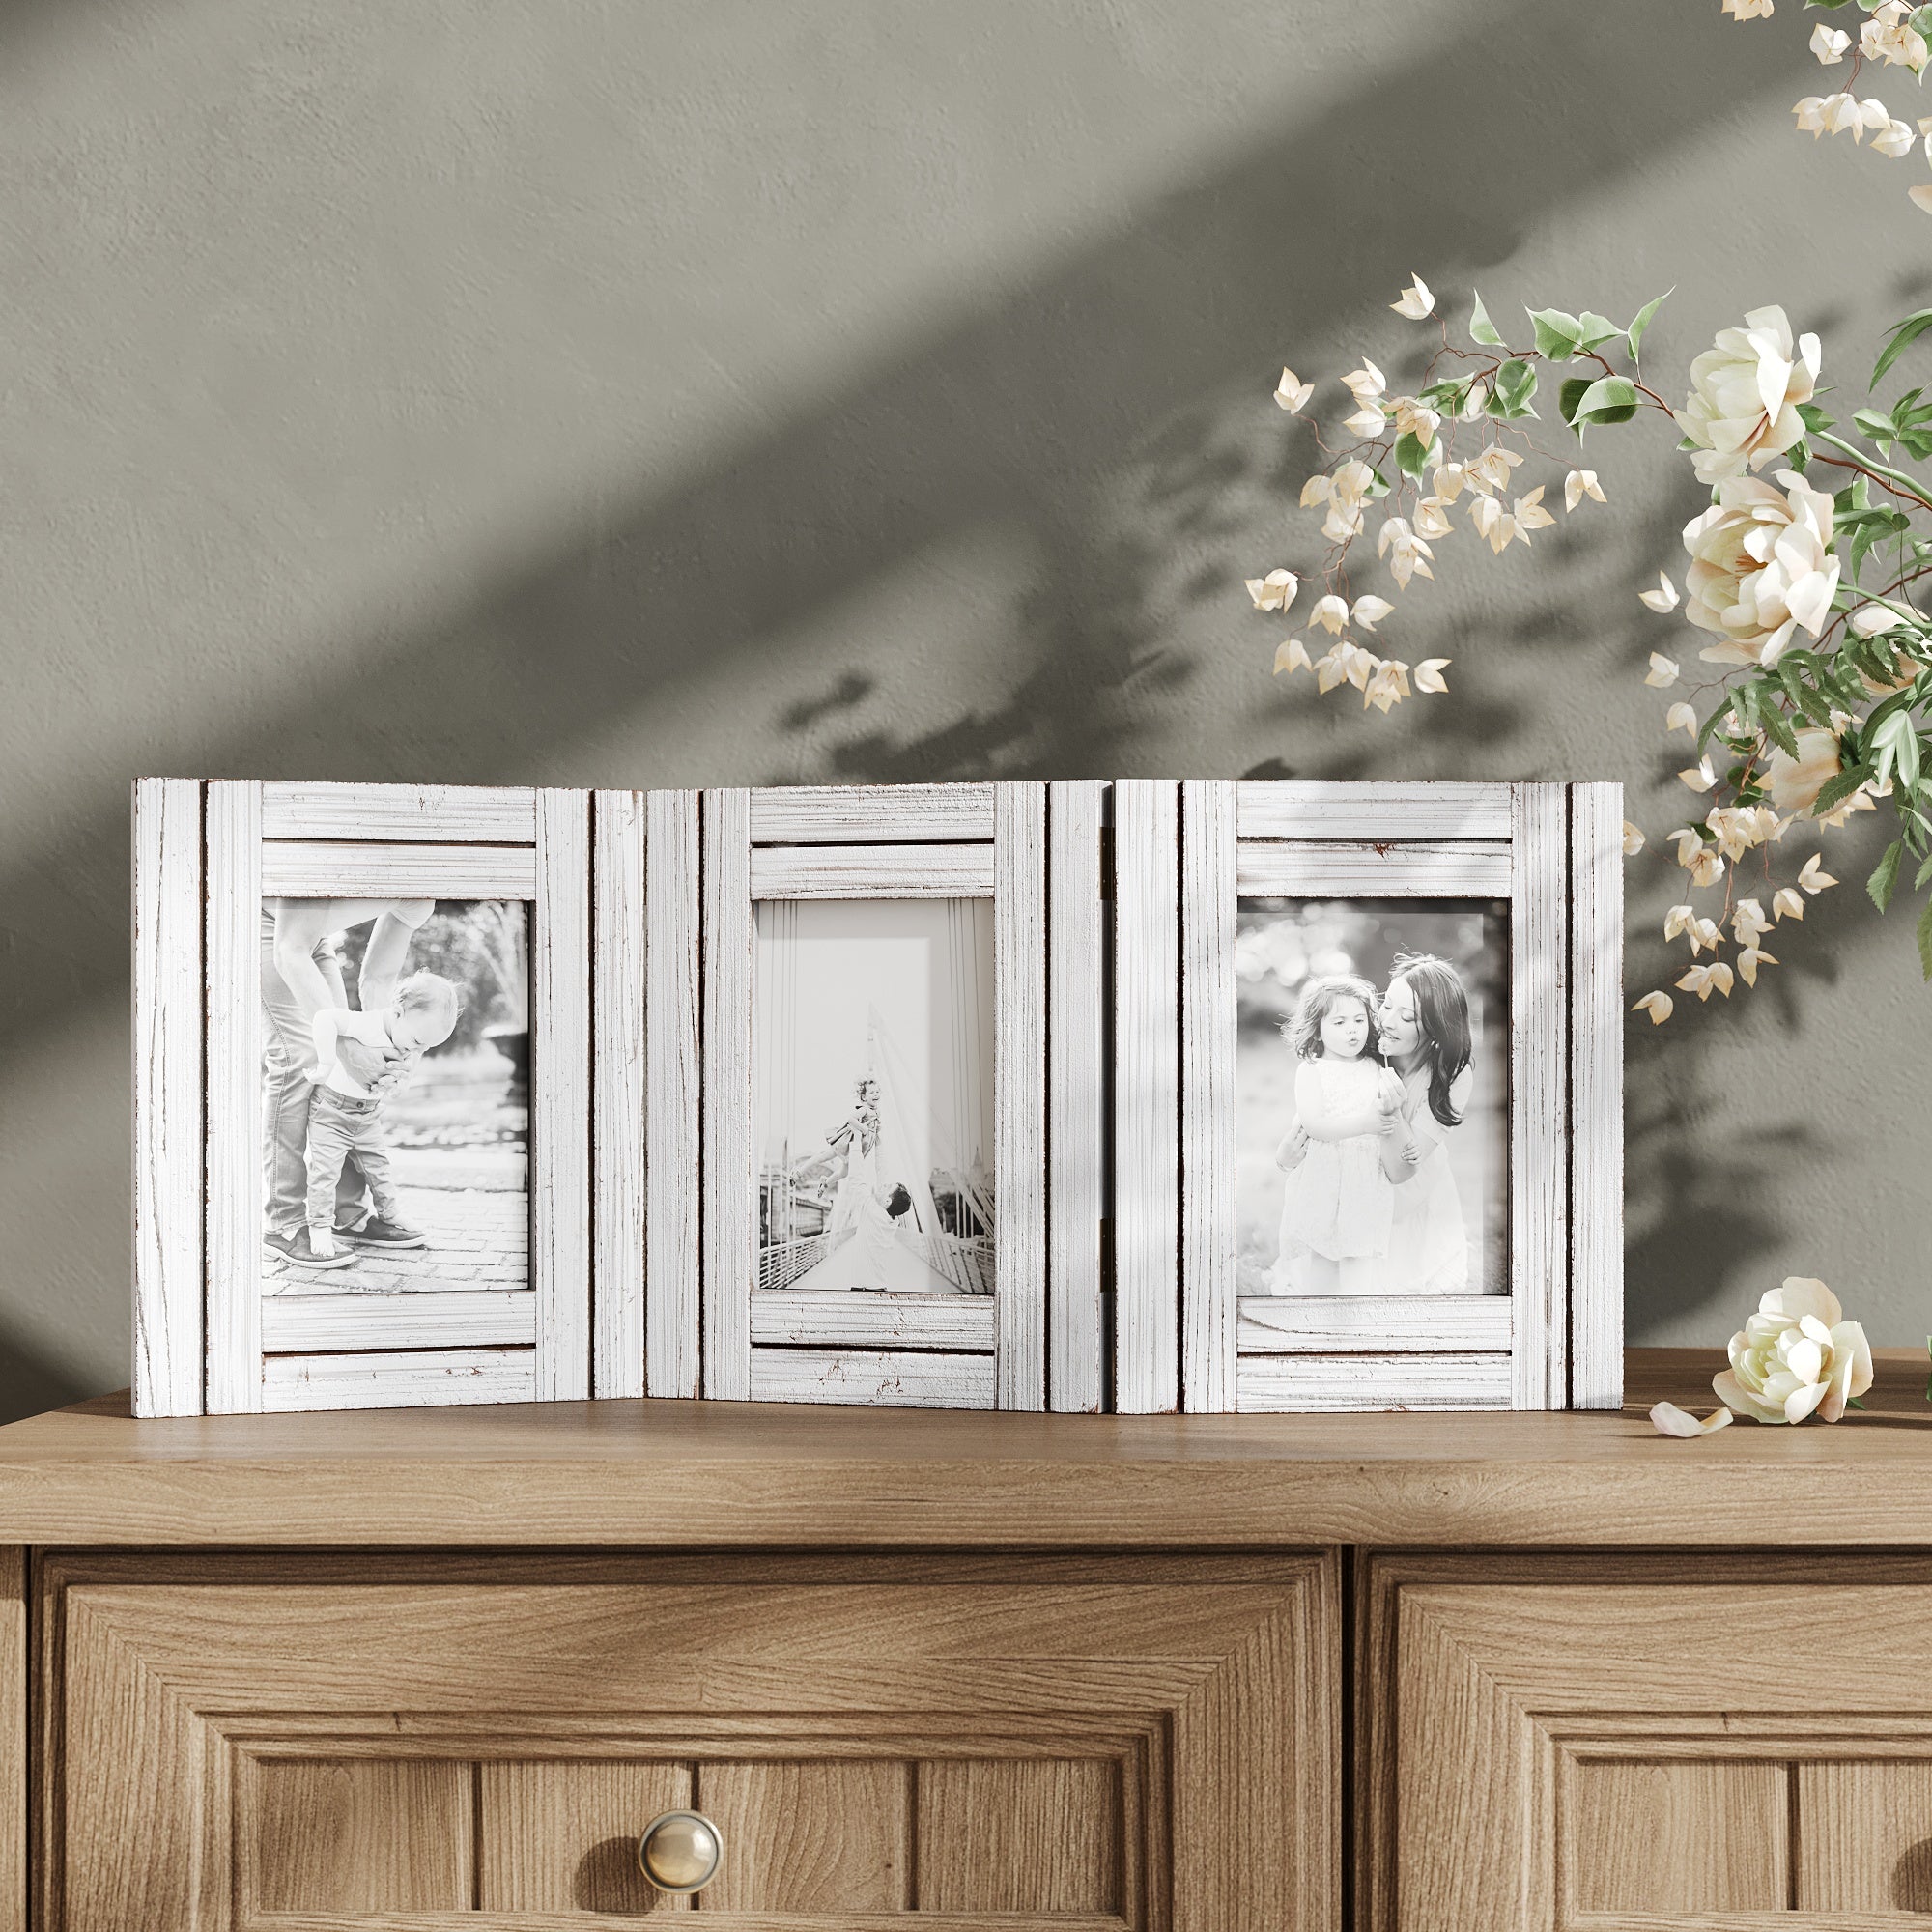 Collage Picture Frames from Rustic Distressed Wood: Holds Four 4x6 Photos:  Ready to Hang. Shabby Chic, Driftwood, Barnwood, Farmhouse, Reclaimed Wood